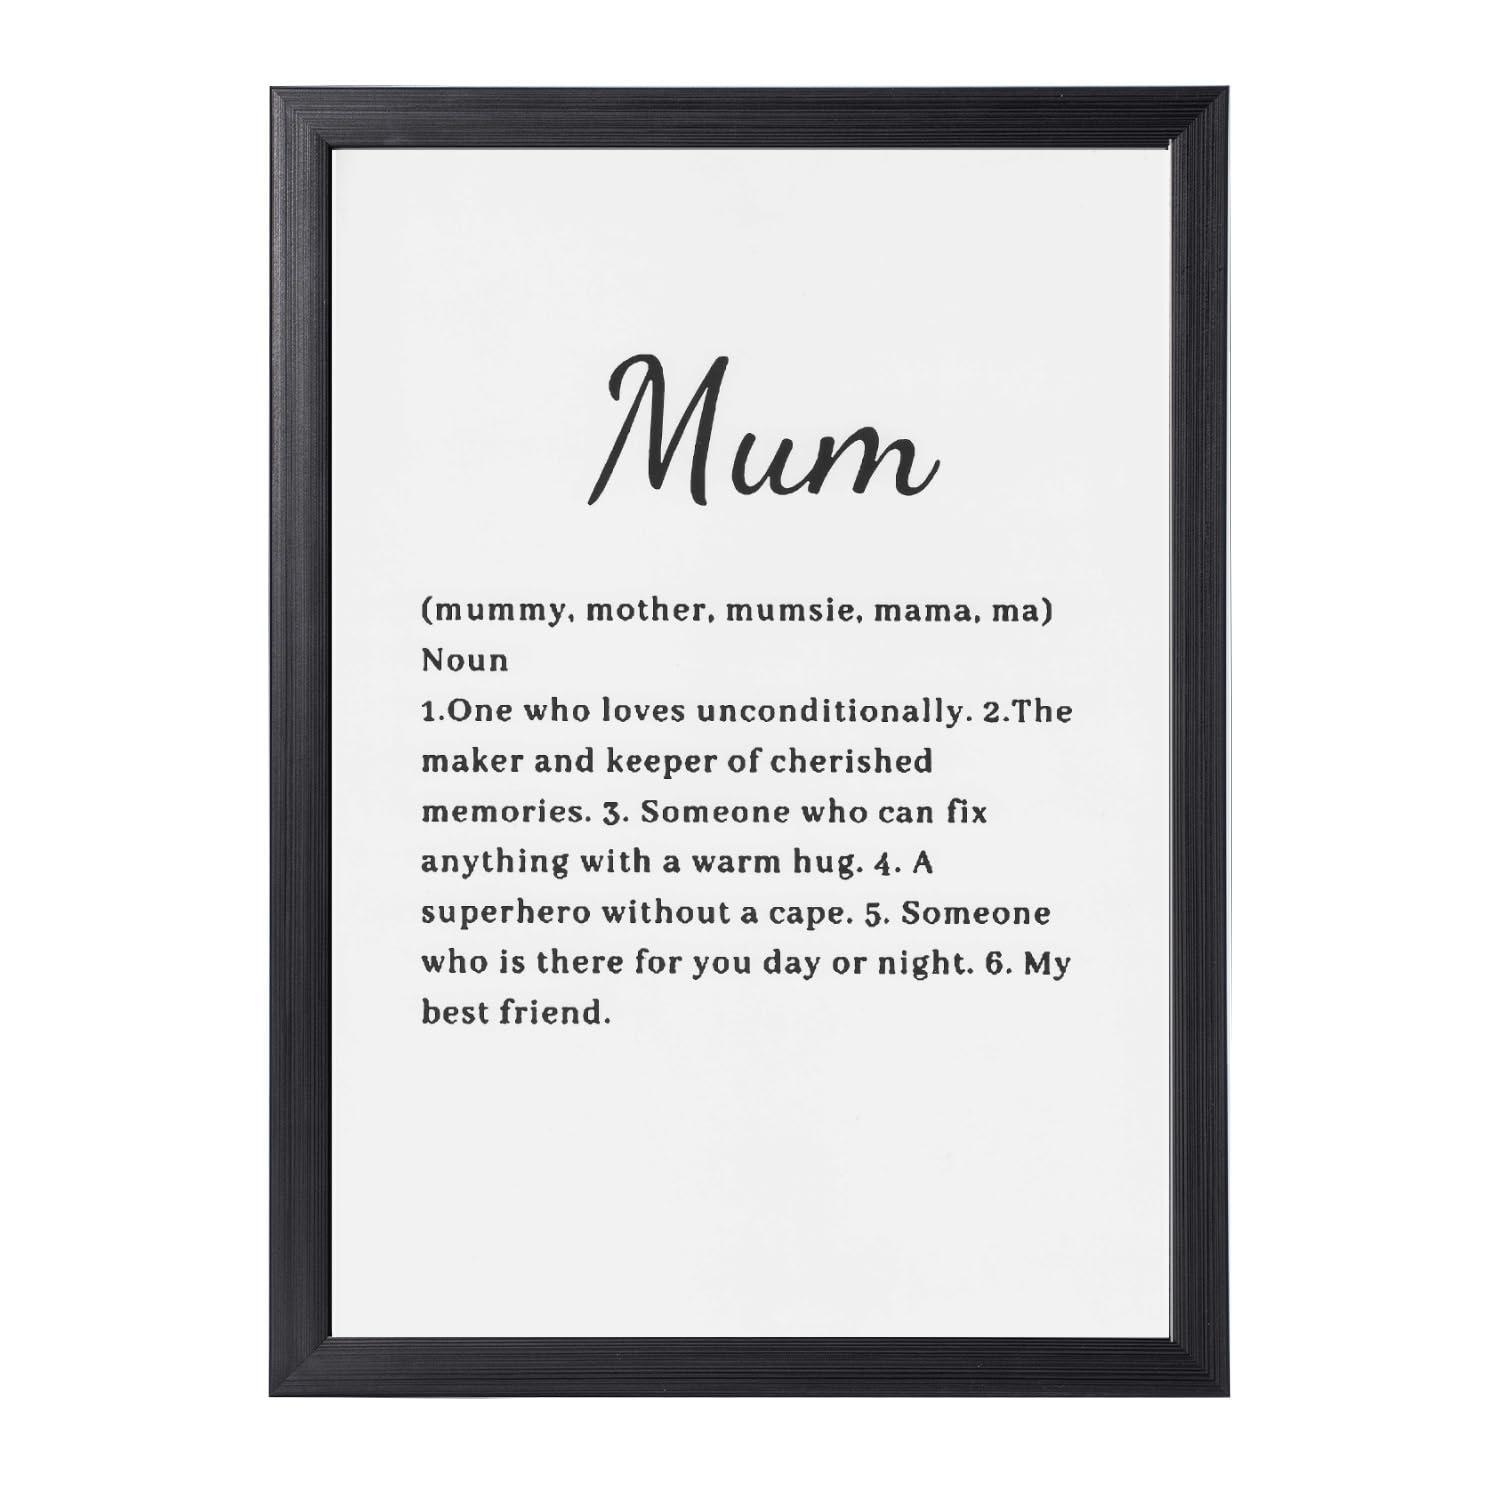 Christmas Mother's Day Gift for Mum Ideal Funny Birthday Gifts for Mum Heart-touching happy decorations Praise Poster and Art Print,Large Handwritten Blue Graffiti Heart Design Present for Mum